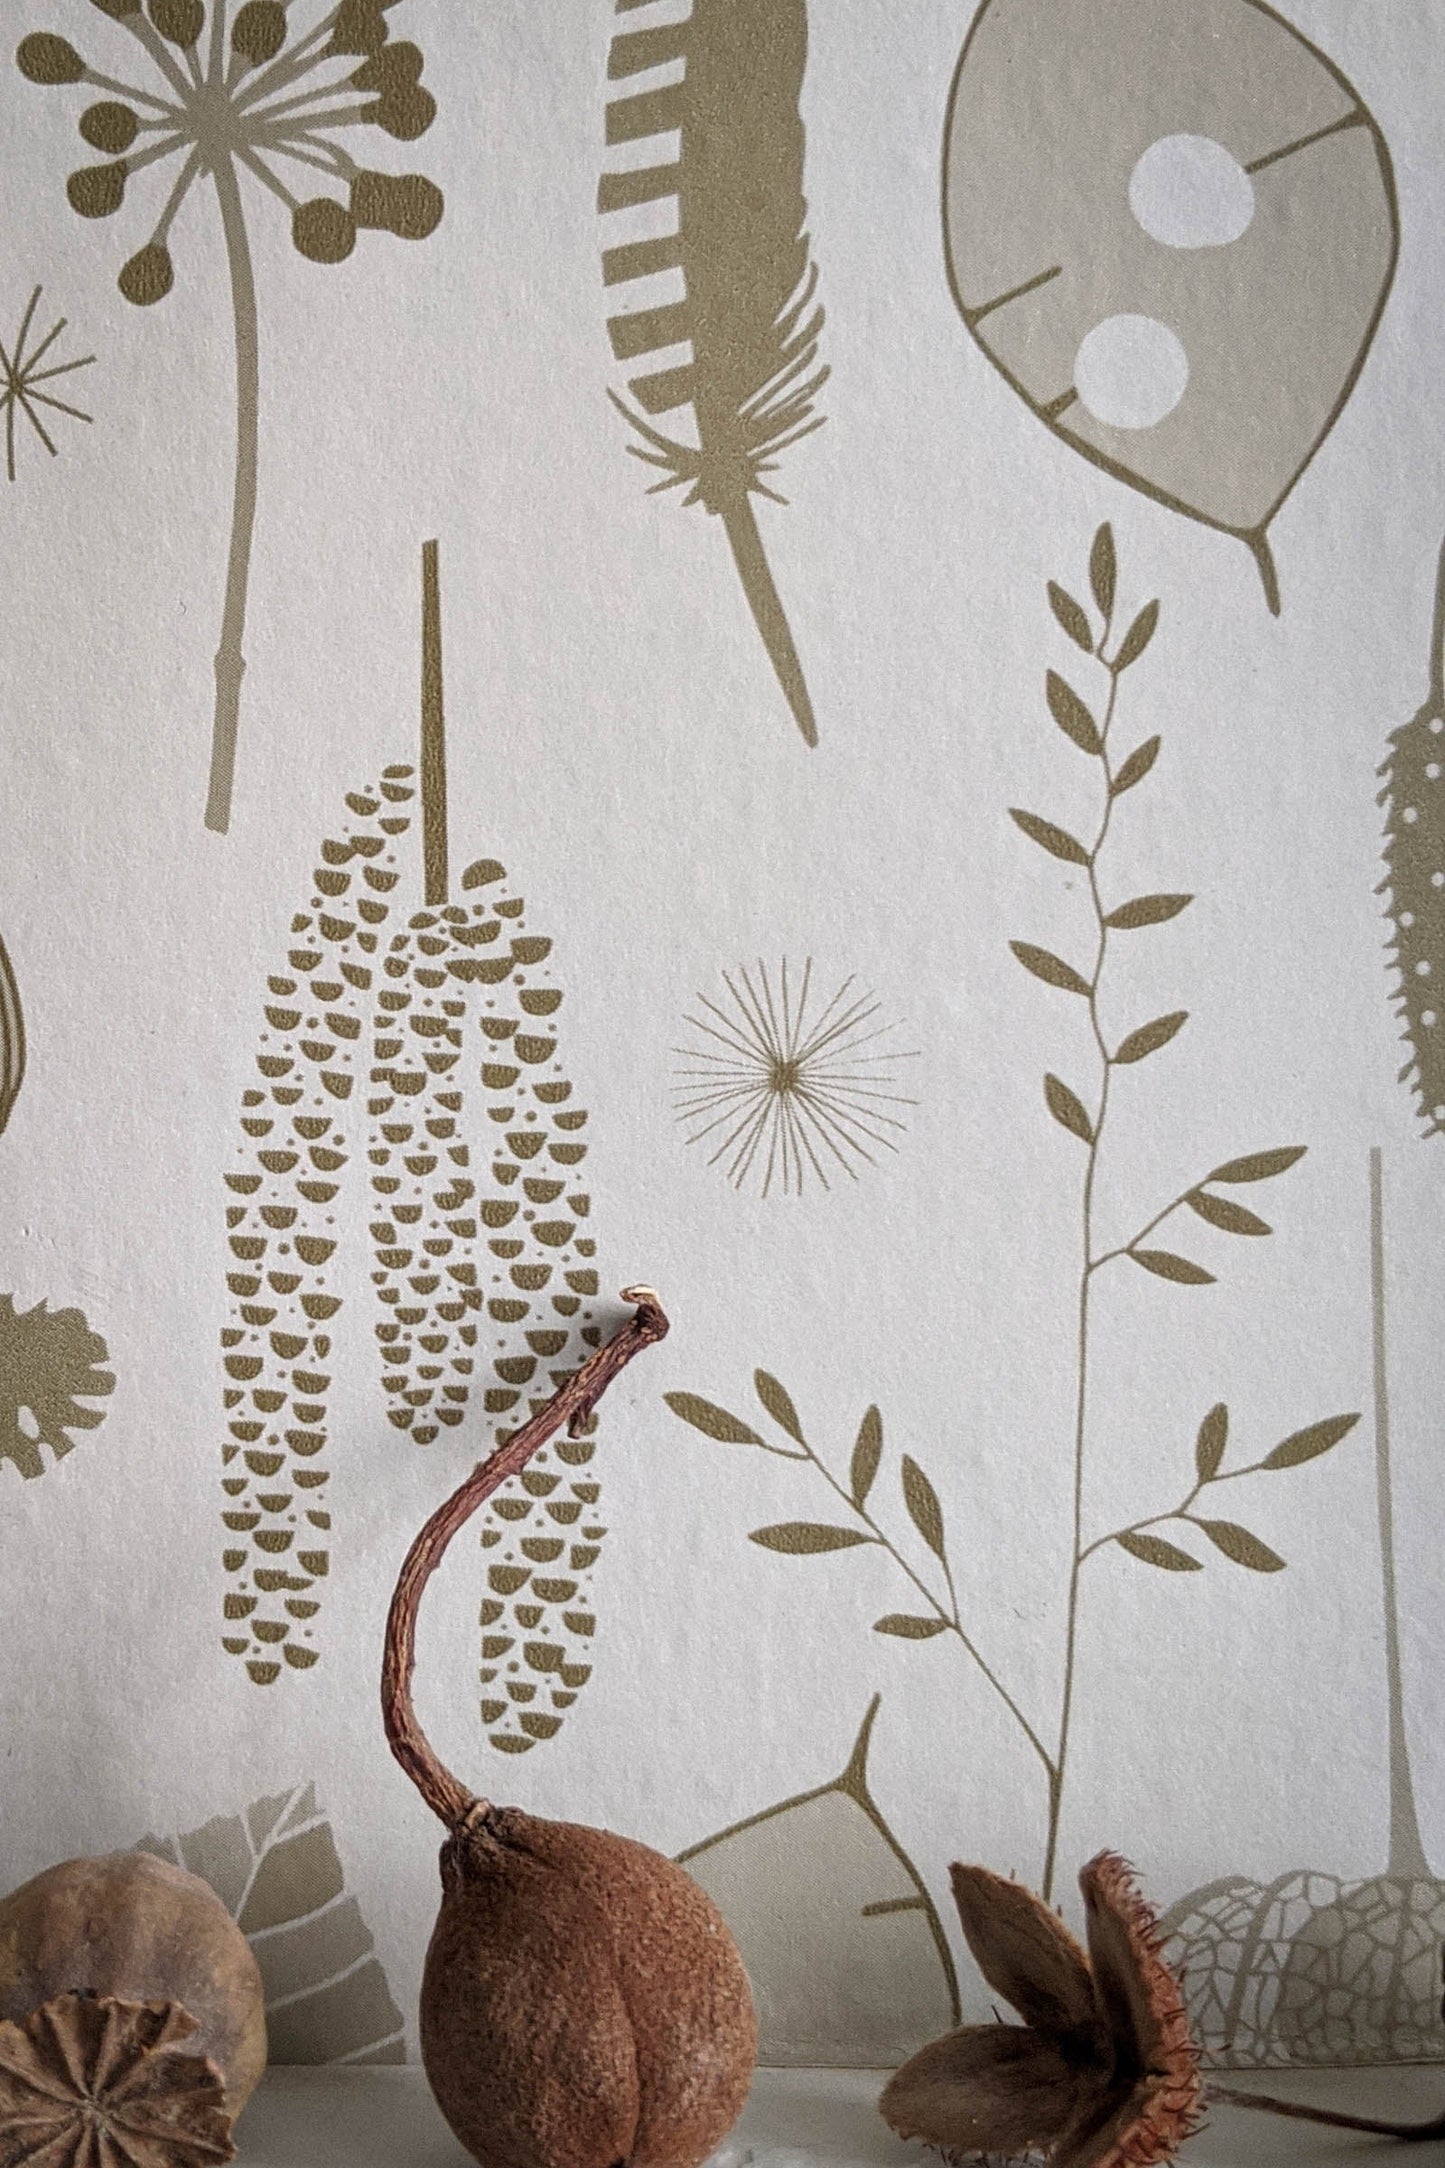 Tiny Treasures Wallpaper in Old Gold